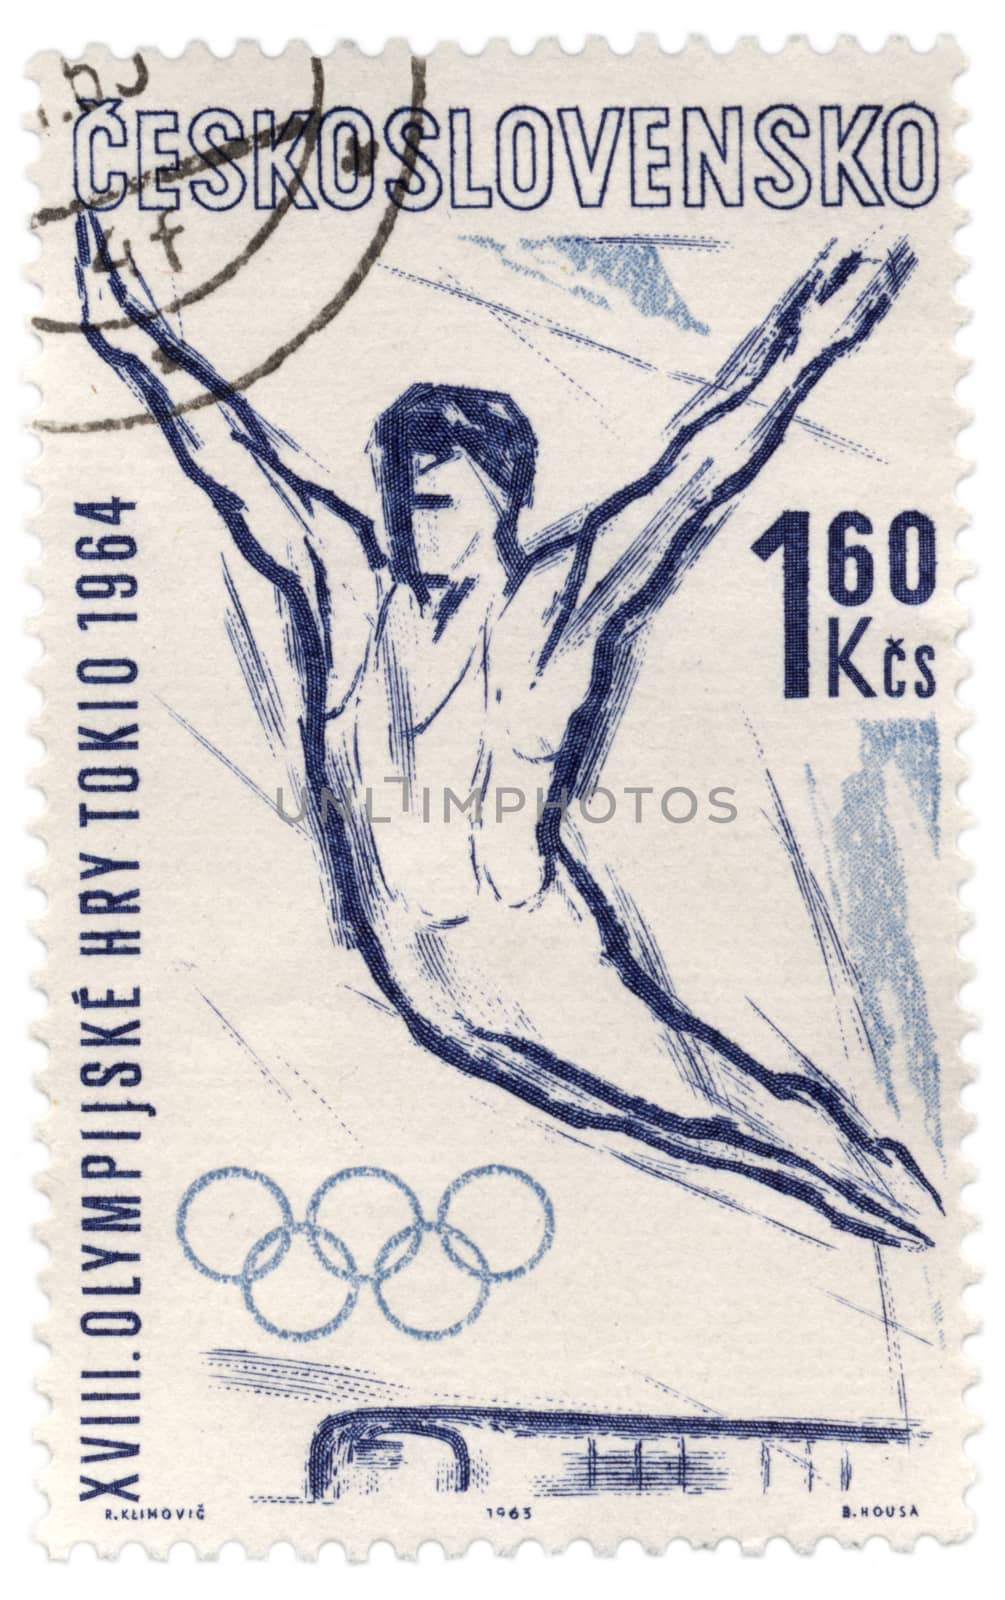 Jumping gymnast on post stamp by wander